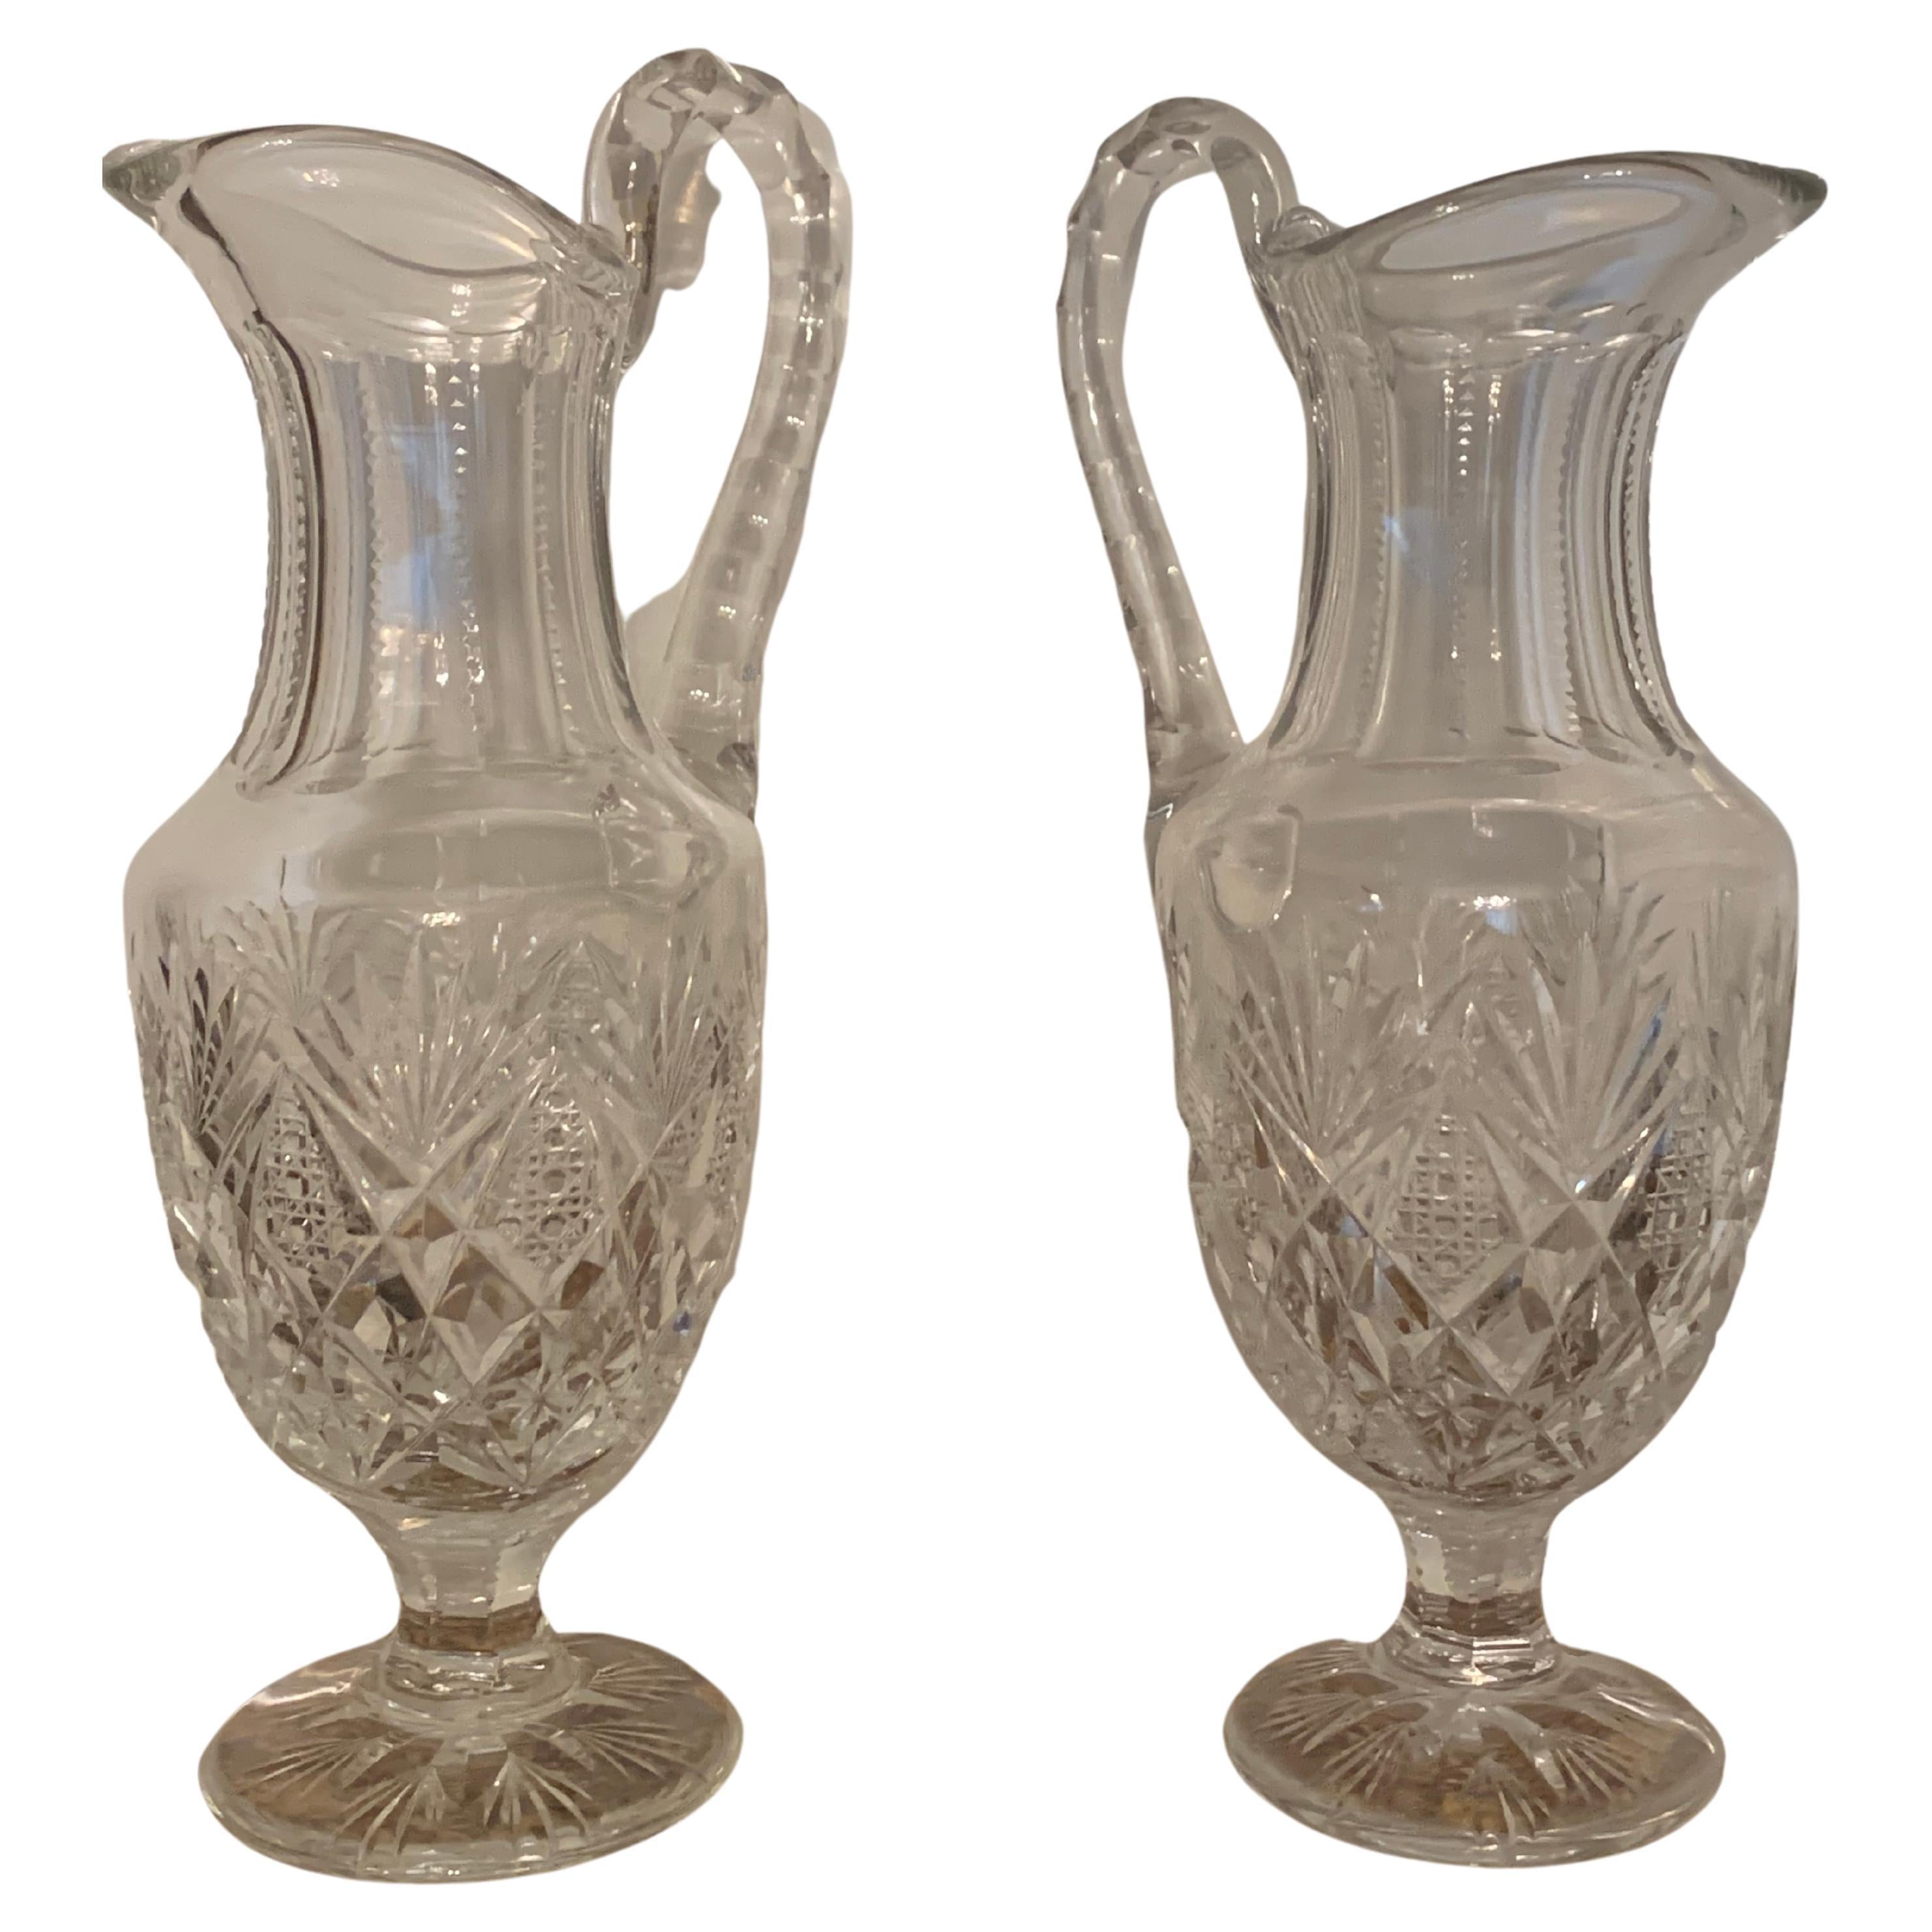 Pair of Crystal Decanters Probably St Louis